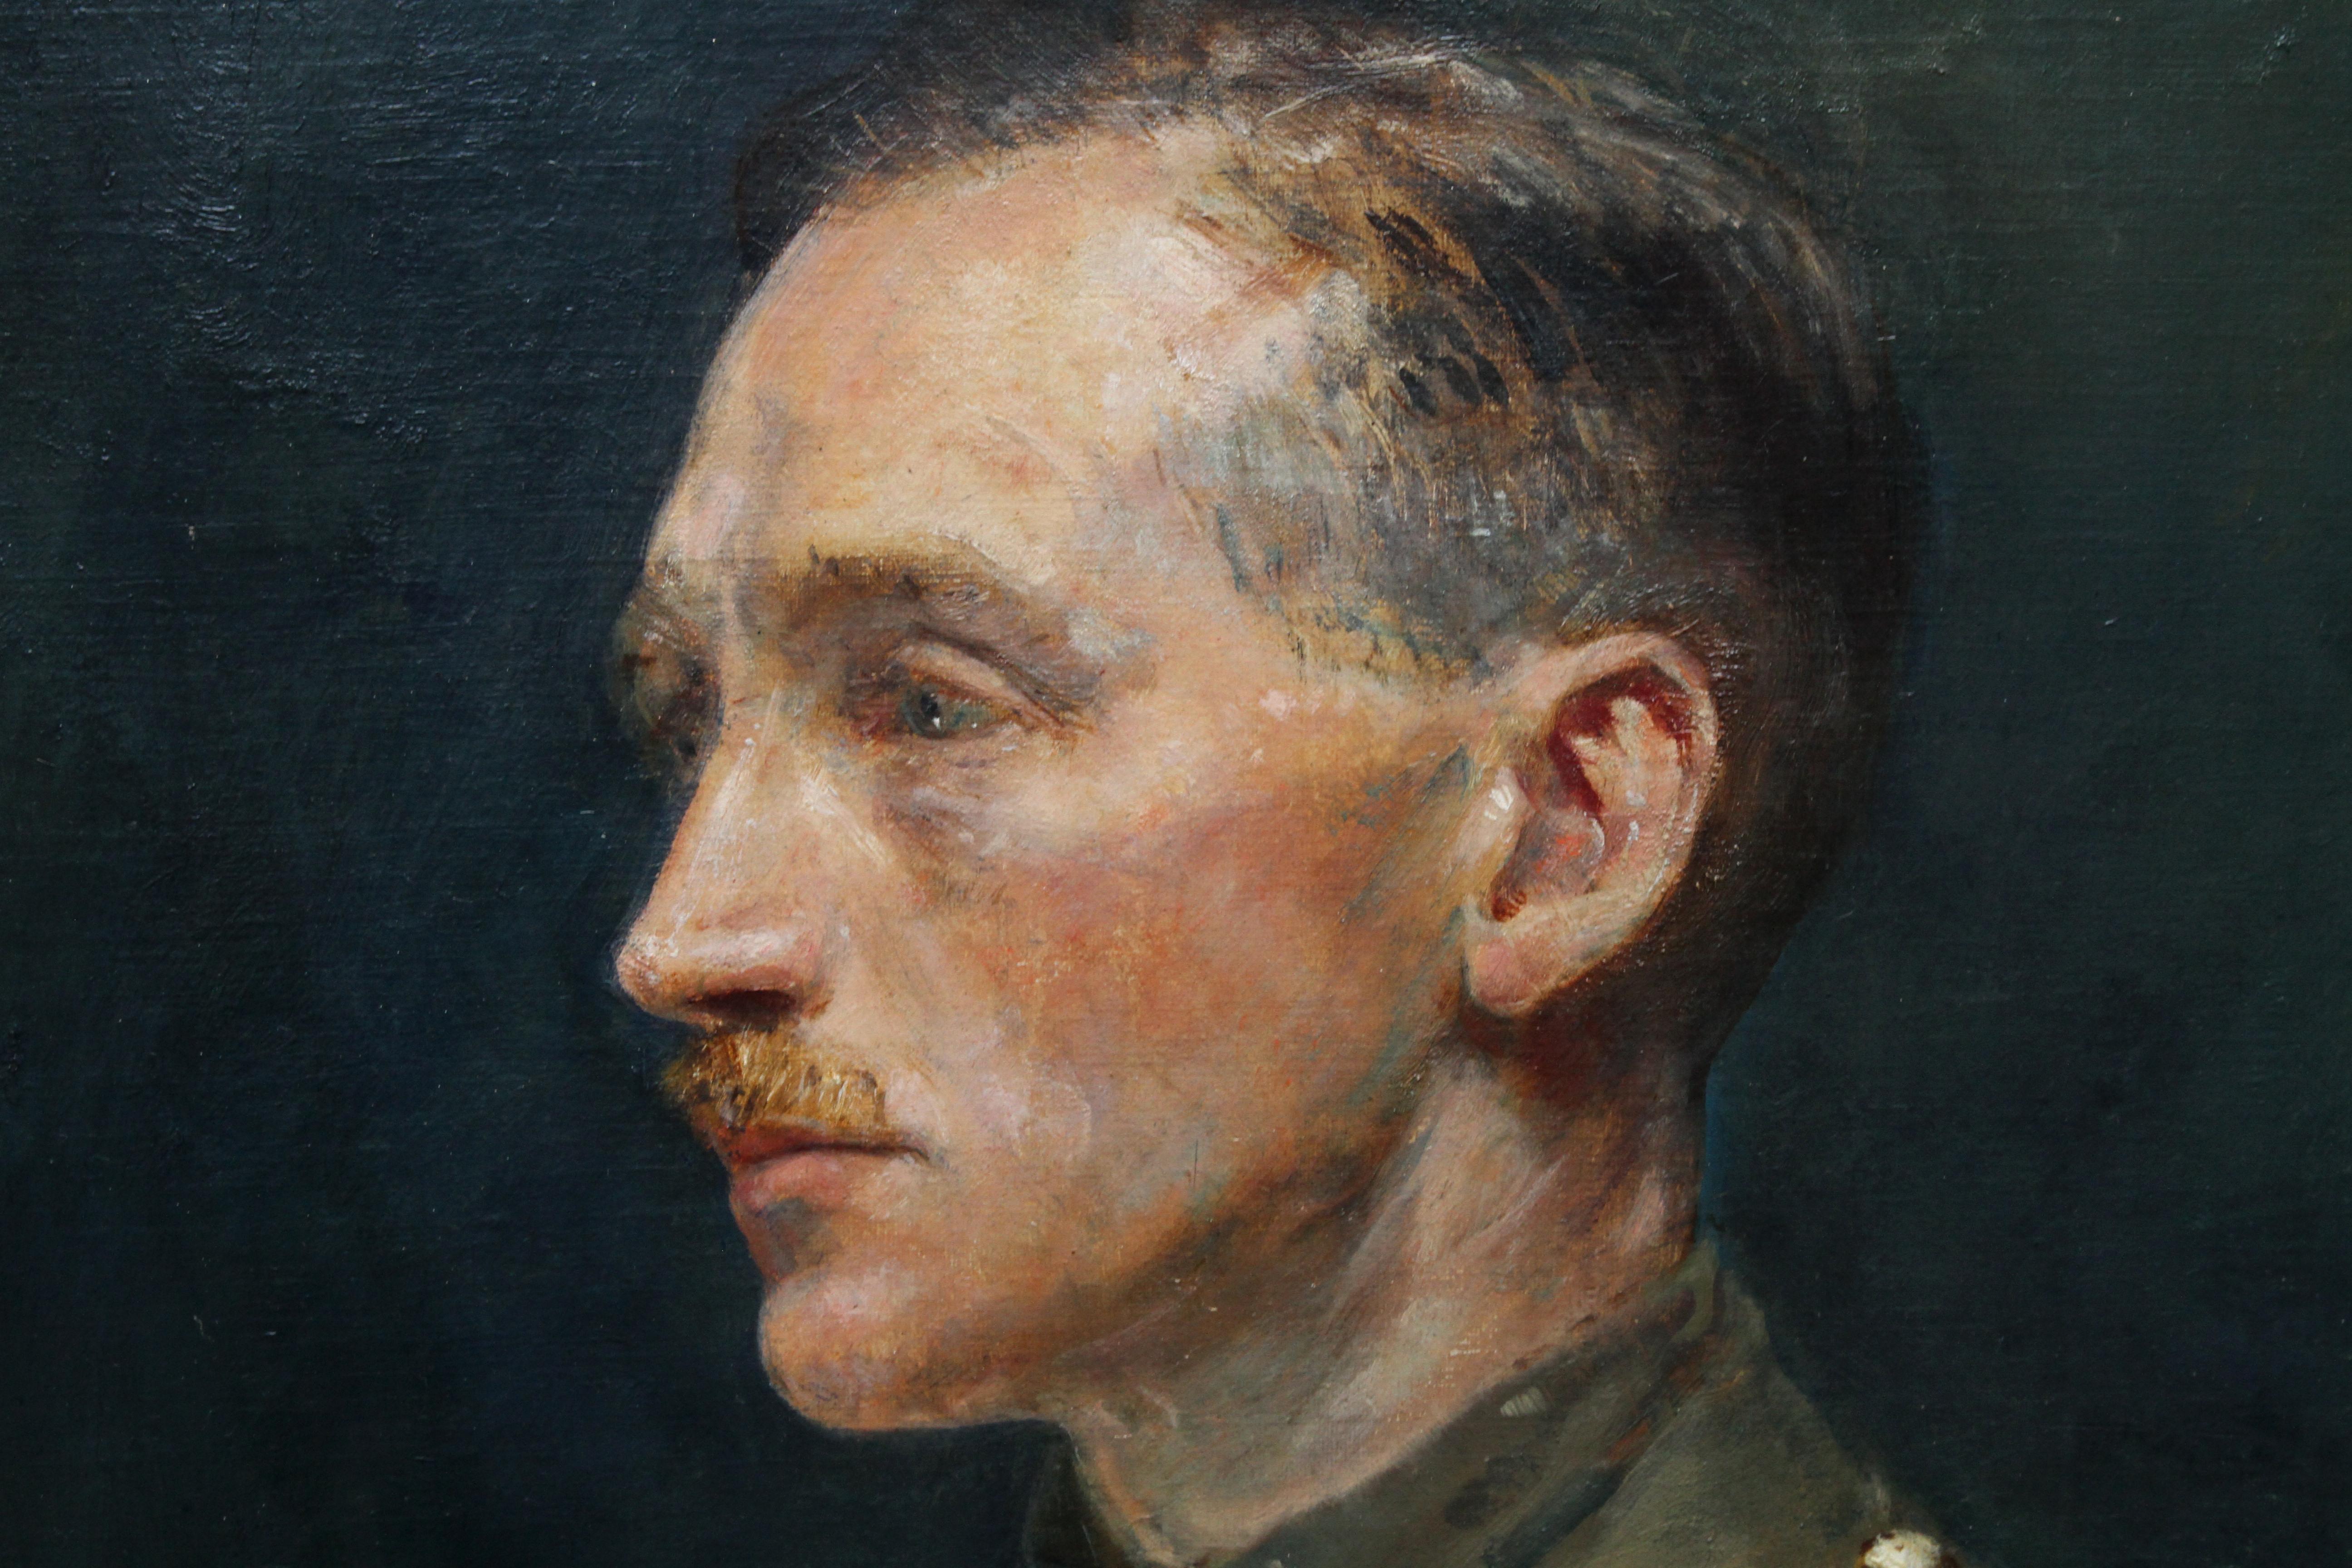 Portrait of Dr Anderson - British Slade School oil painting military uniform WWI - Realist Painting by Arthur Ambrose McEvoy